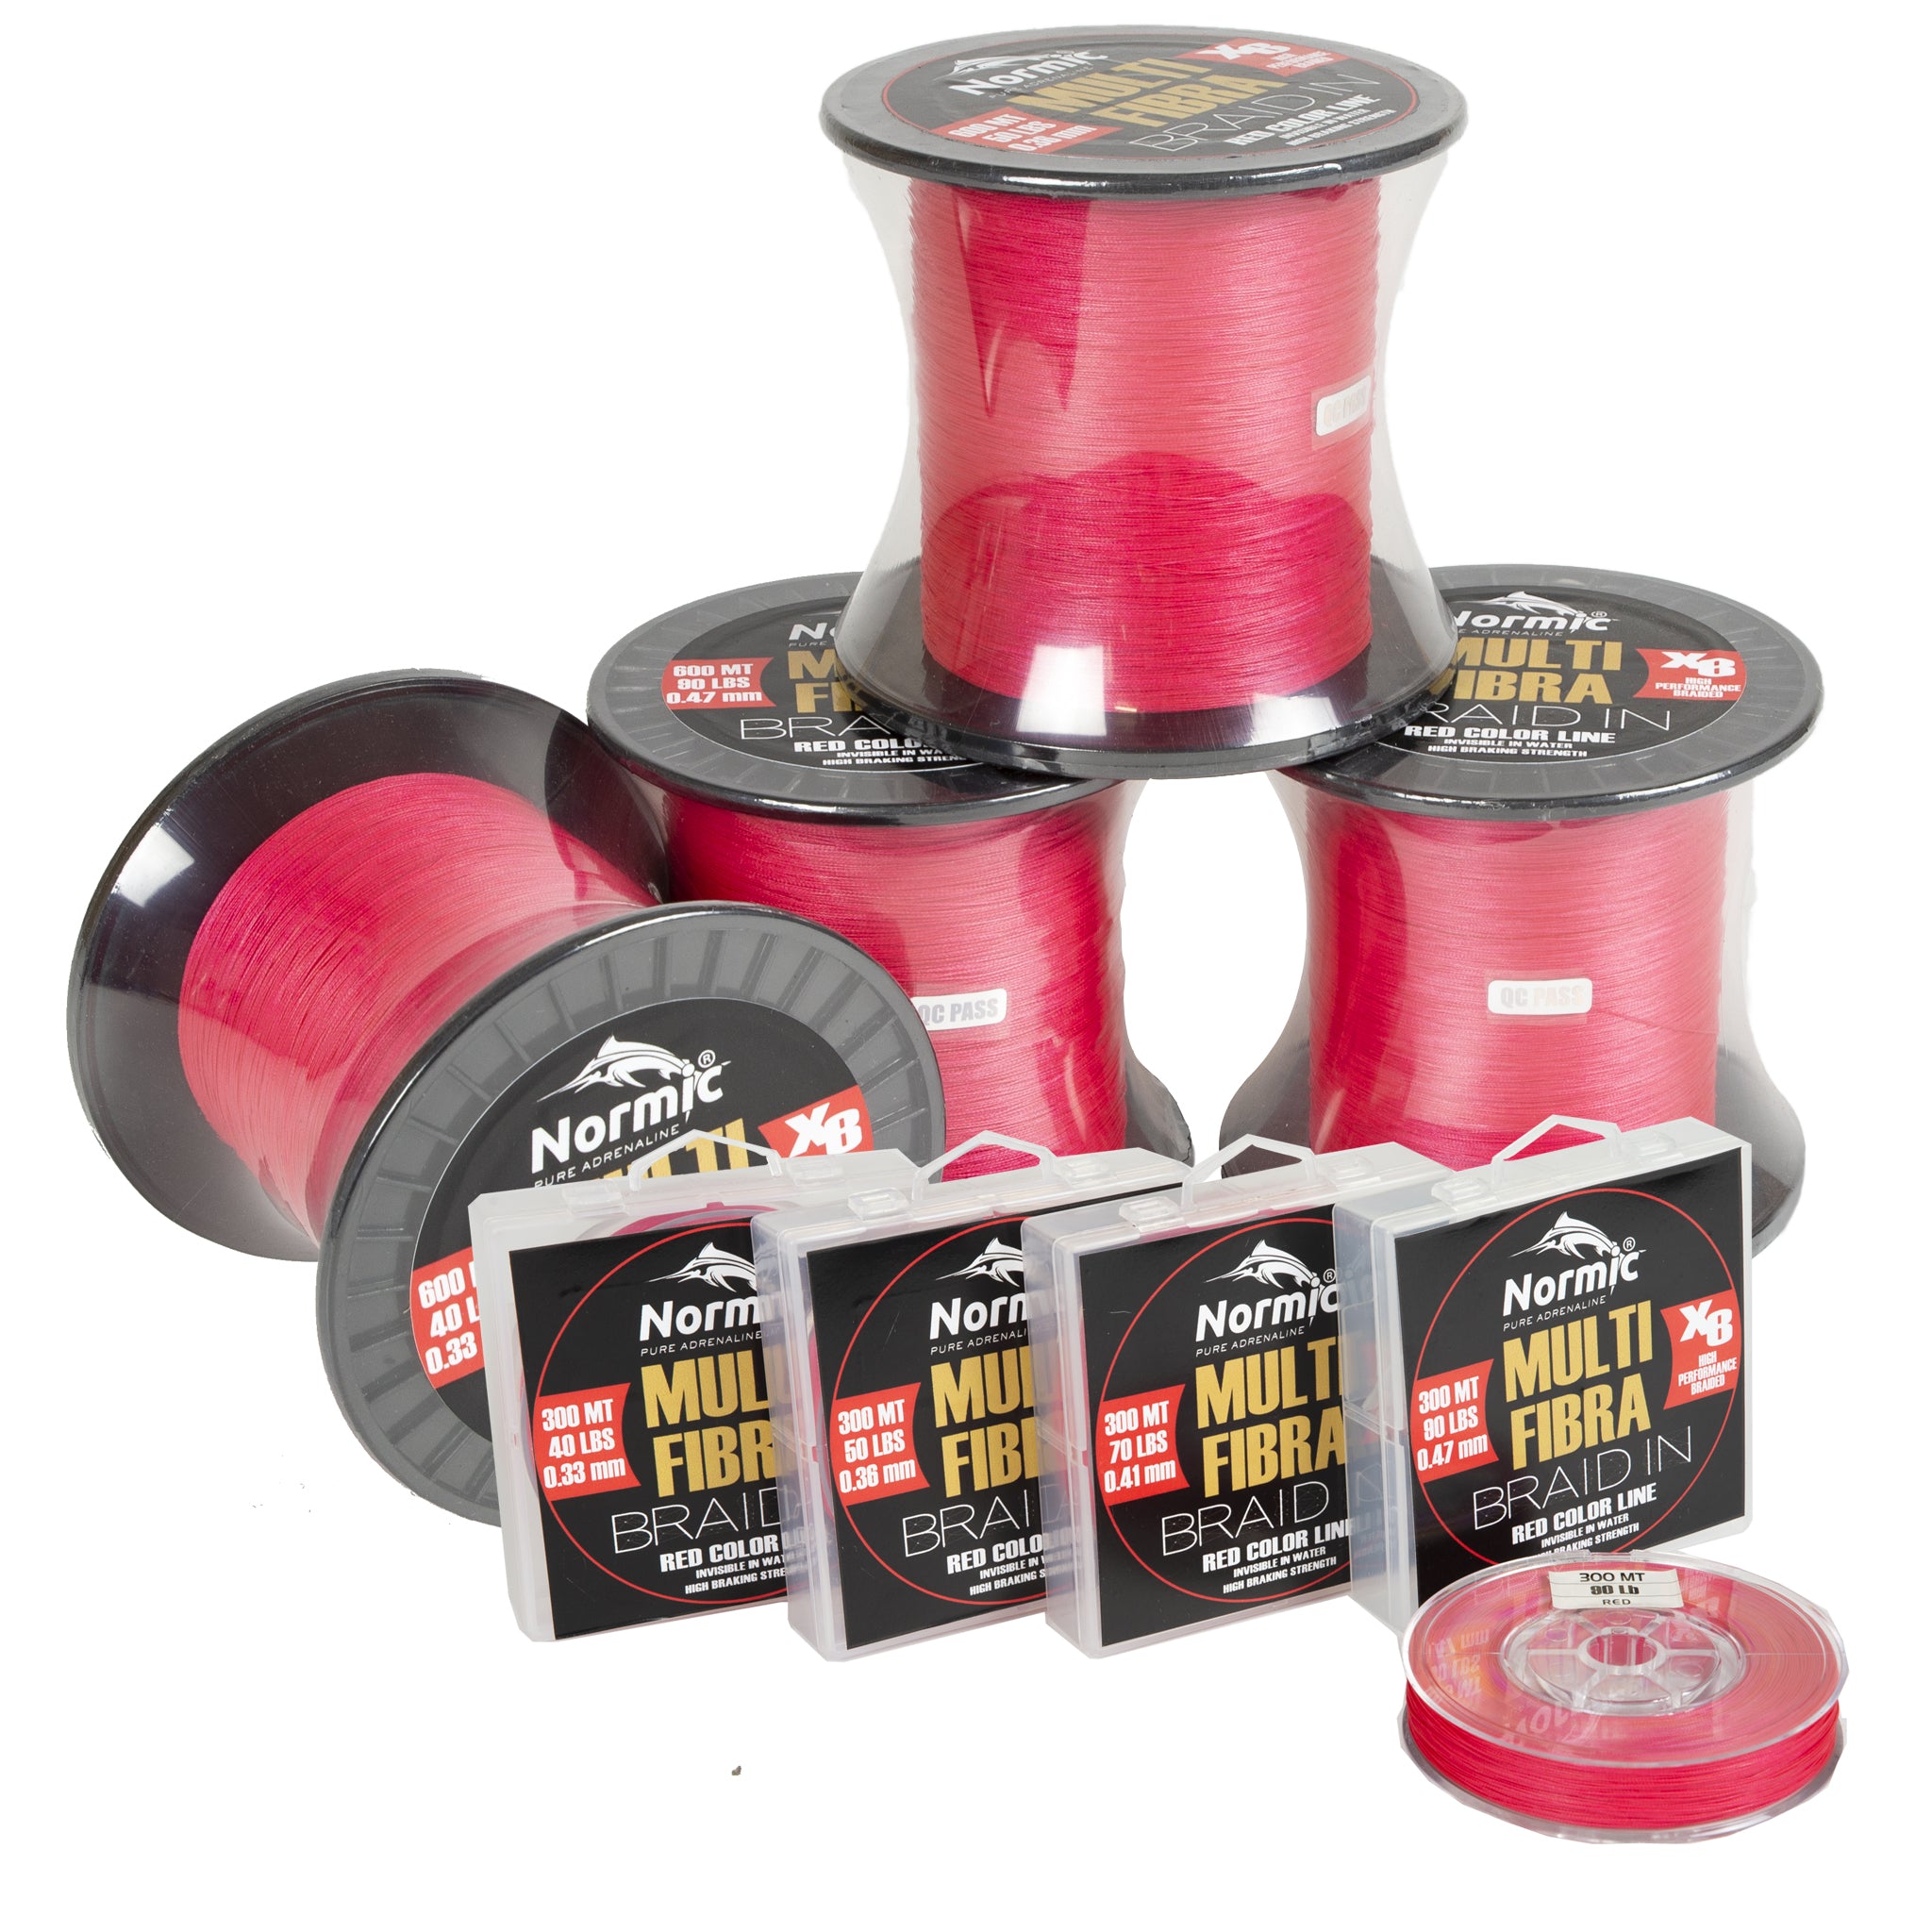 Multifibre Braid In - Fishing Wire Competitions - High Resistance